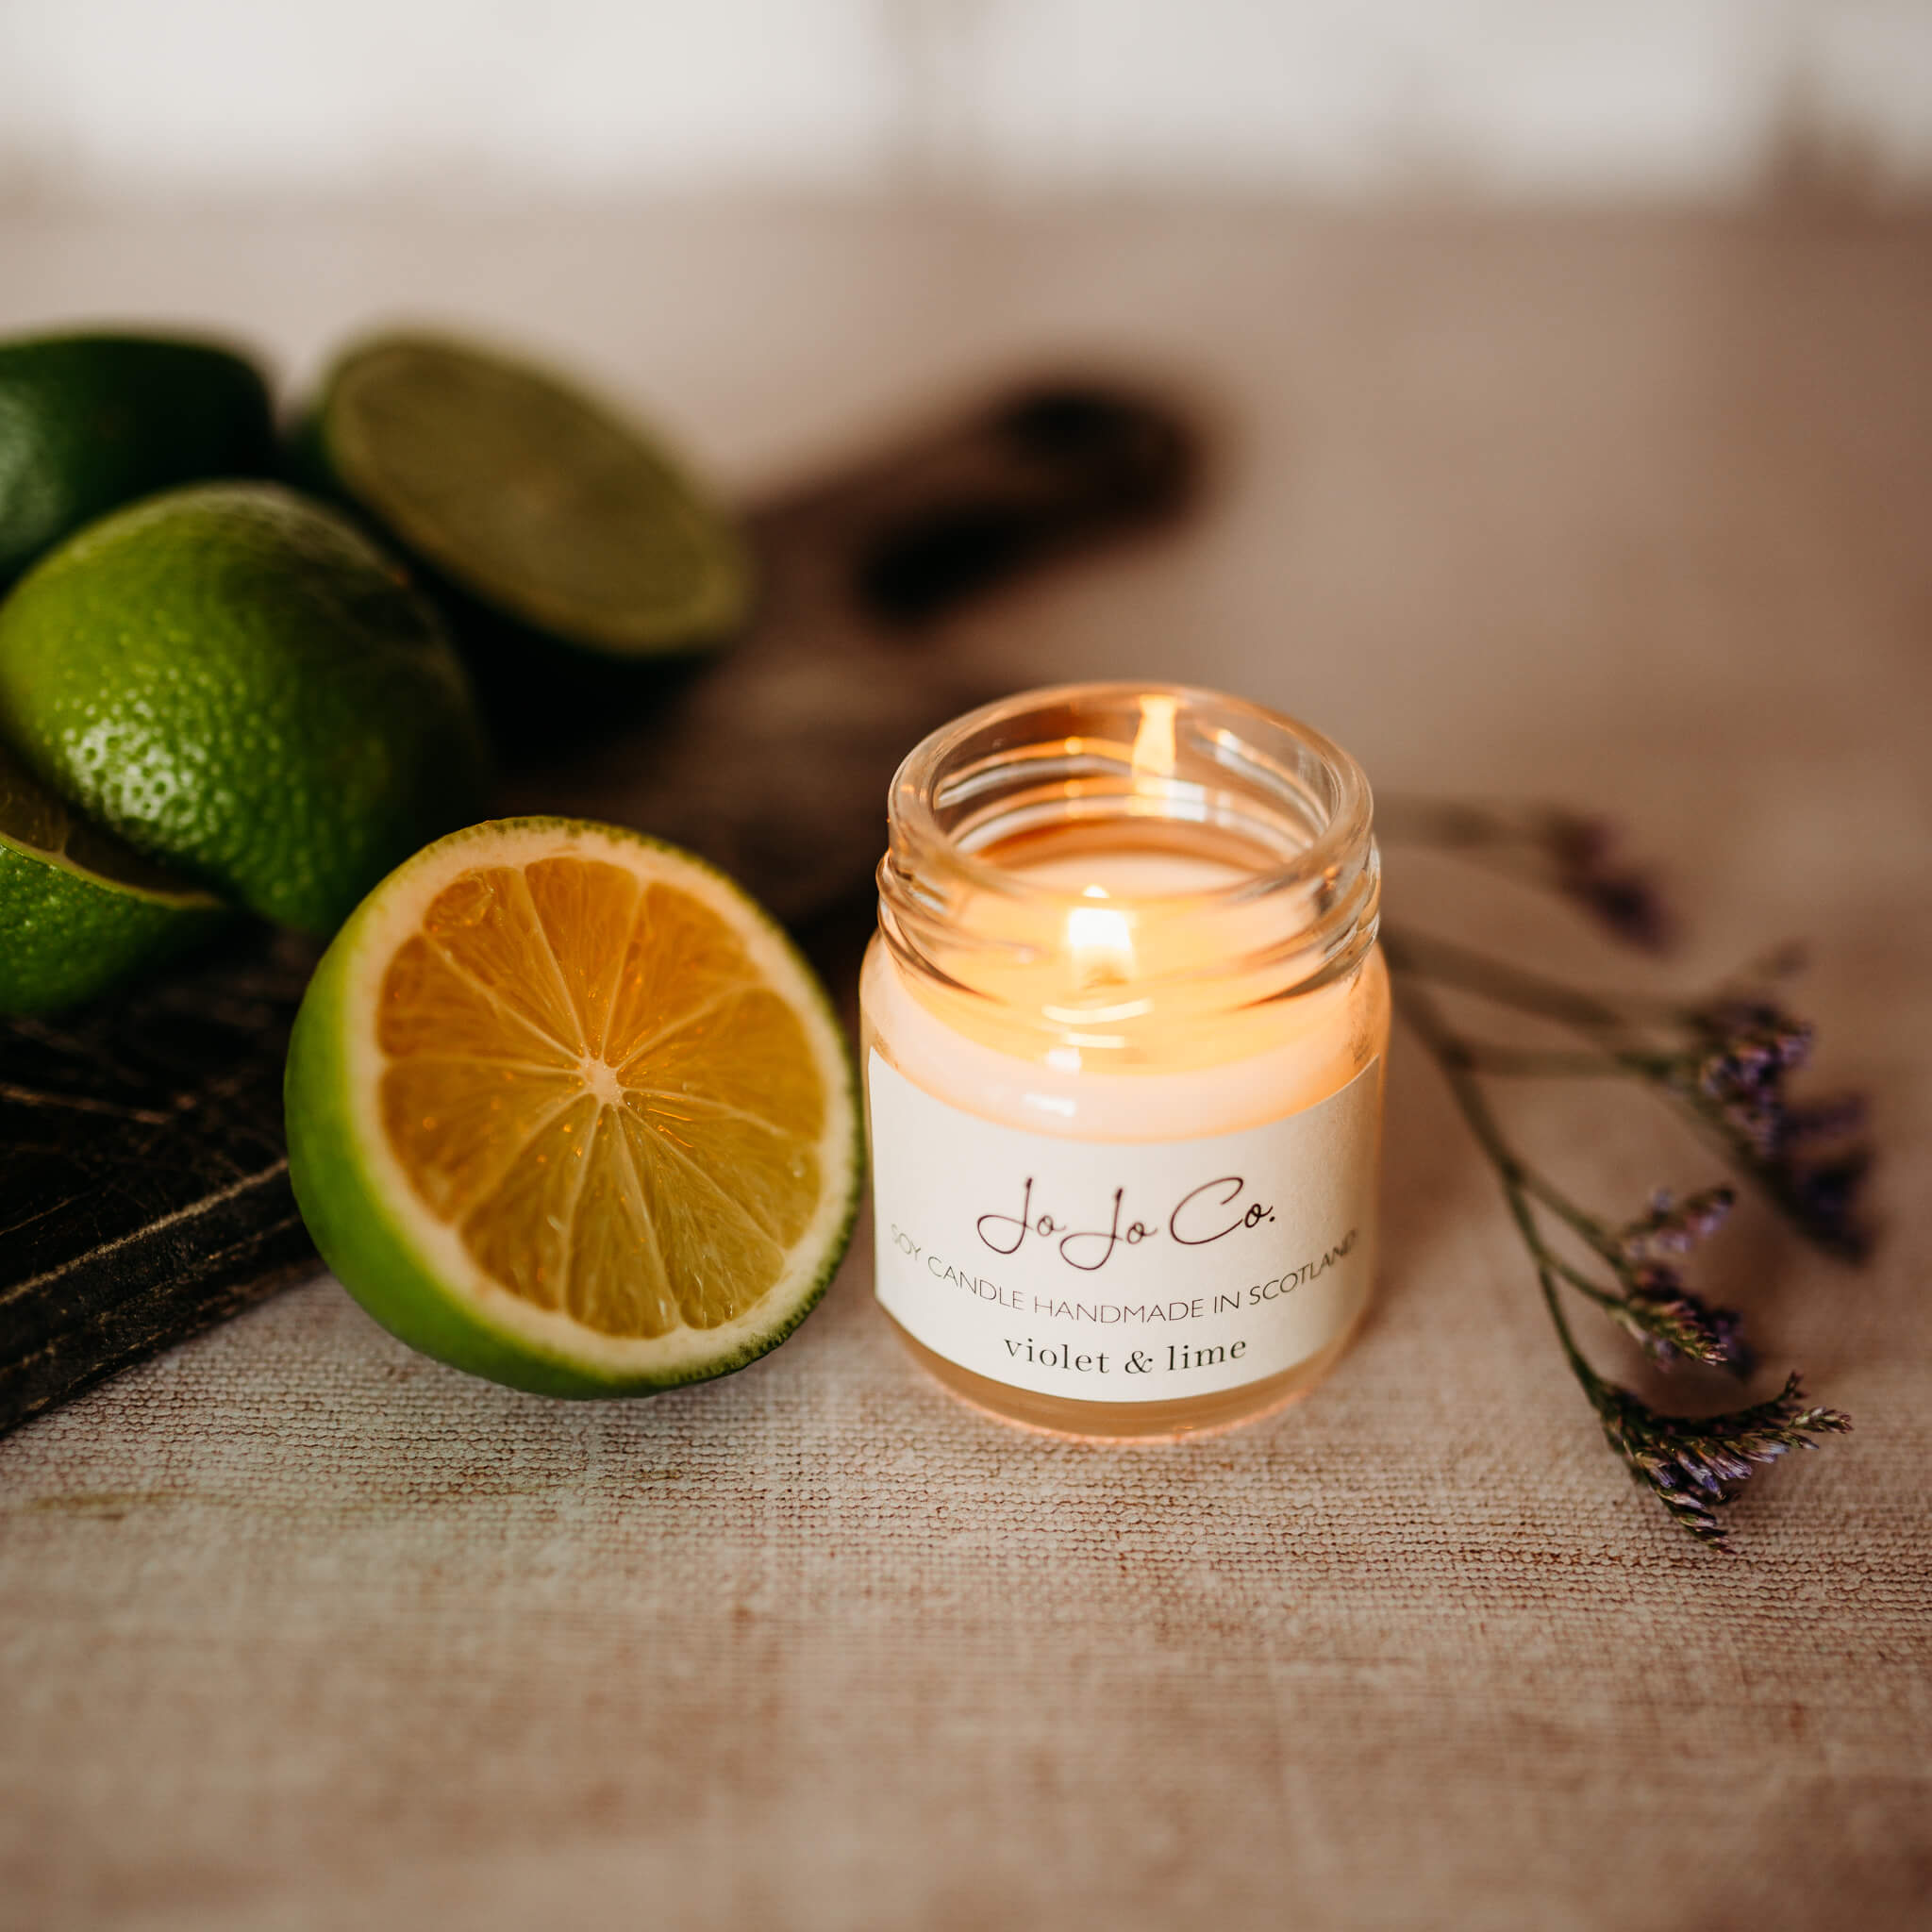 Violet & lime mini candle. A small glass jar from JoJo Co. sits beside slices of lime and dried violets on a jute surface. The candle is lit, casting a warm glow from the glass jar.